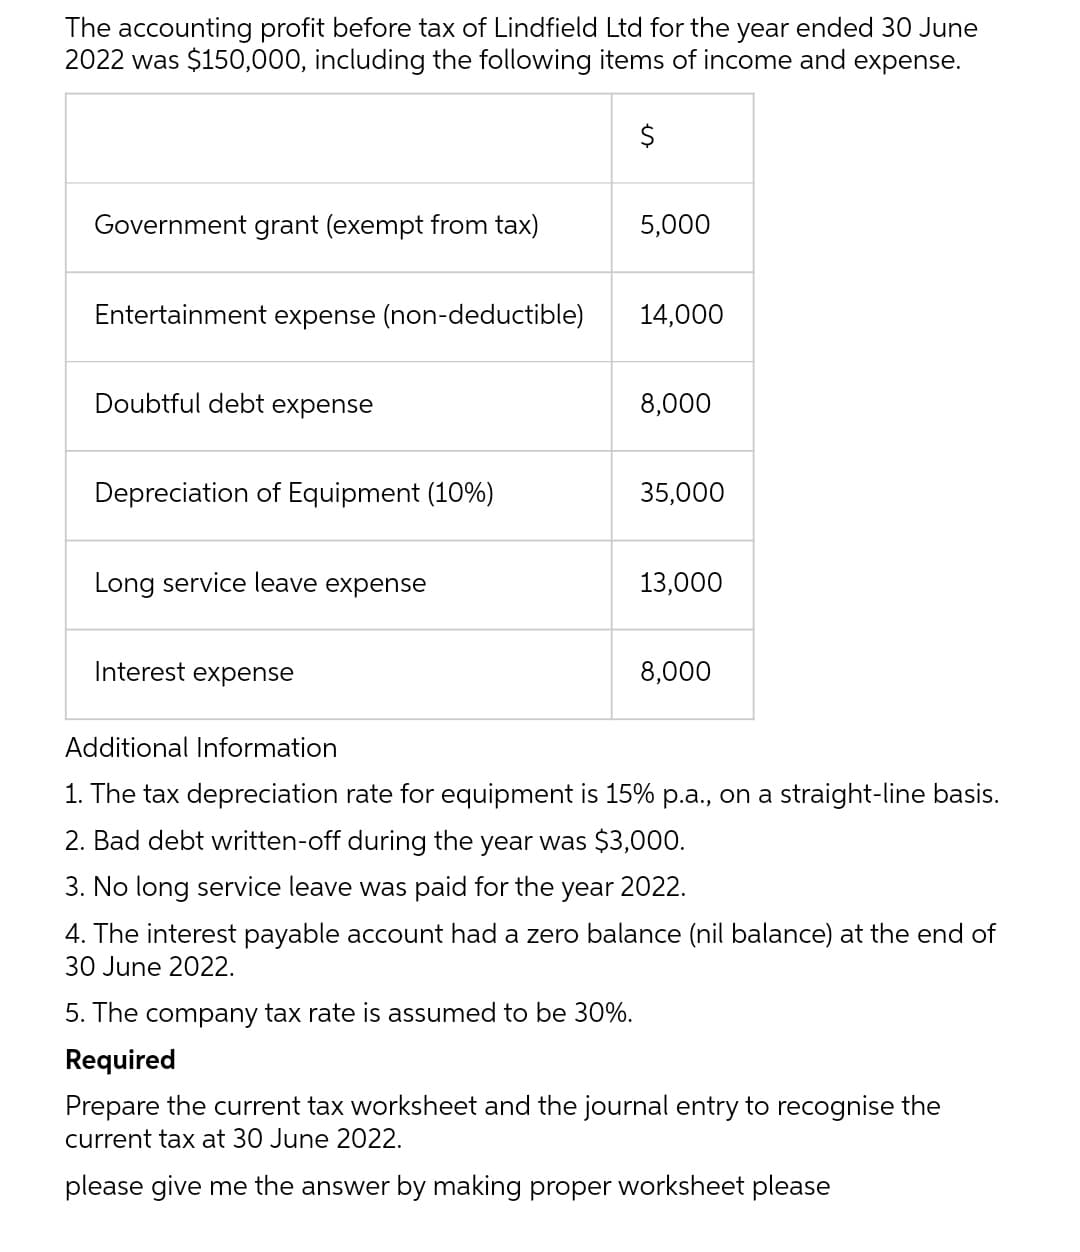 The accounting profit before tax of Lindfield Ltd for the year ended 30 June
2022 was $150,000, including the following items of income and expense.
$
Government grant (exempt from tax)
Entertainment expense (non-deductible)
Doubtful debt expense
Depreciation of Equipment (10%)
Long service leave expense
Interest expense
5,000
14,000
8,000
35,000
13,000
8,000
Additional Information
1. The tax depreciation rate for equipment is 15% p.a., on a straight-line basis.
2. Bad debt written-off during the year was $3,000.
3. No long service leave was paid for the year 2022.
4. The interest payable account had a zero balance (nil balance) at the end of
30 June 2022.
5. The company tax rate is assumed to be 30%.
Required
Prepare the current tax worksheet and the journal entry to recognise the
current tax at 30 June 2022.
please give me the answer by making proper worksheet please